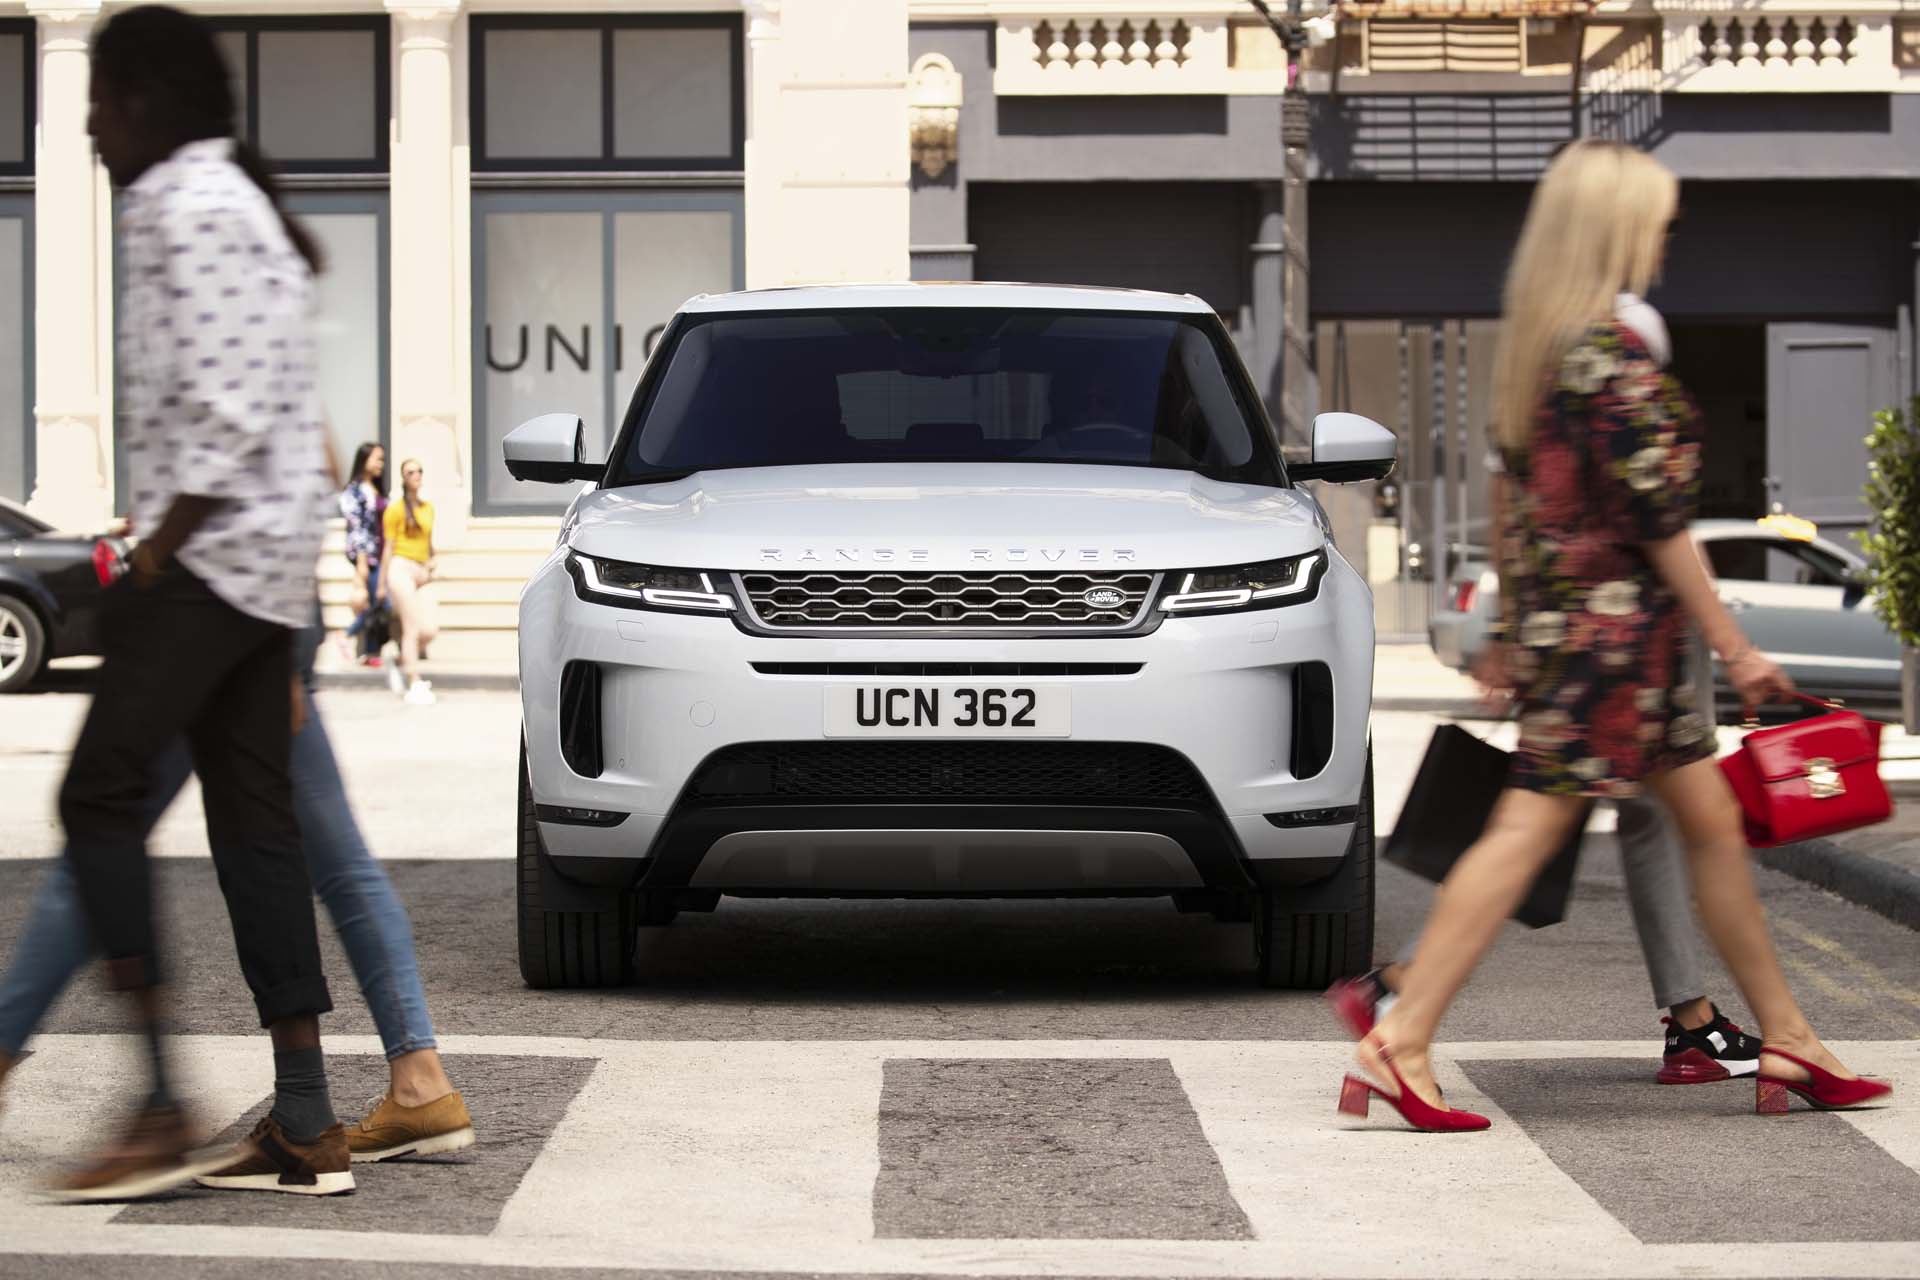 2020 Rover Evoque, R1T electric pickup truck, LA auto show: What's New The Car Connection